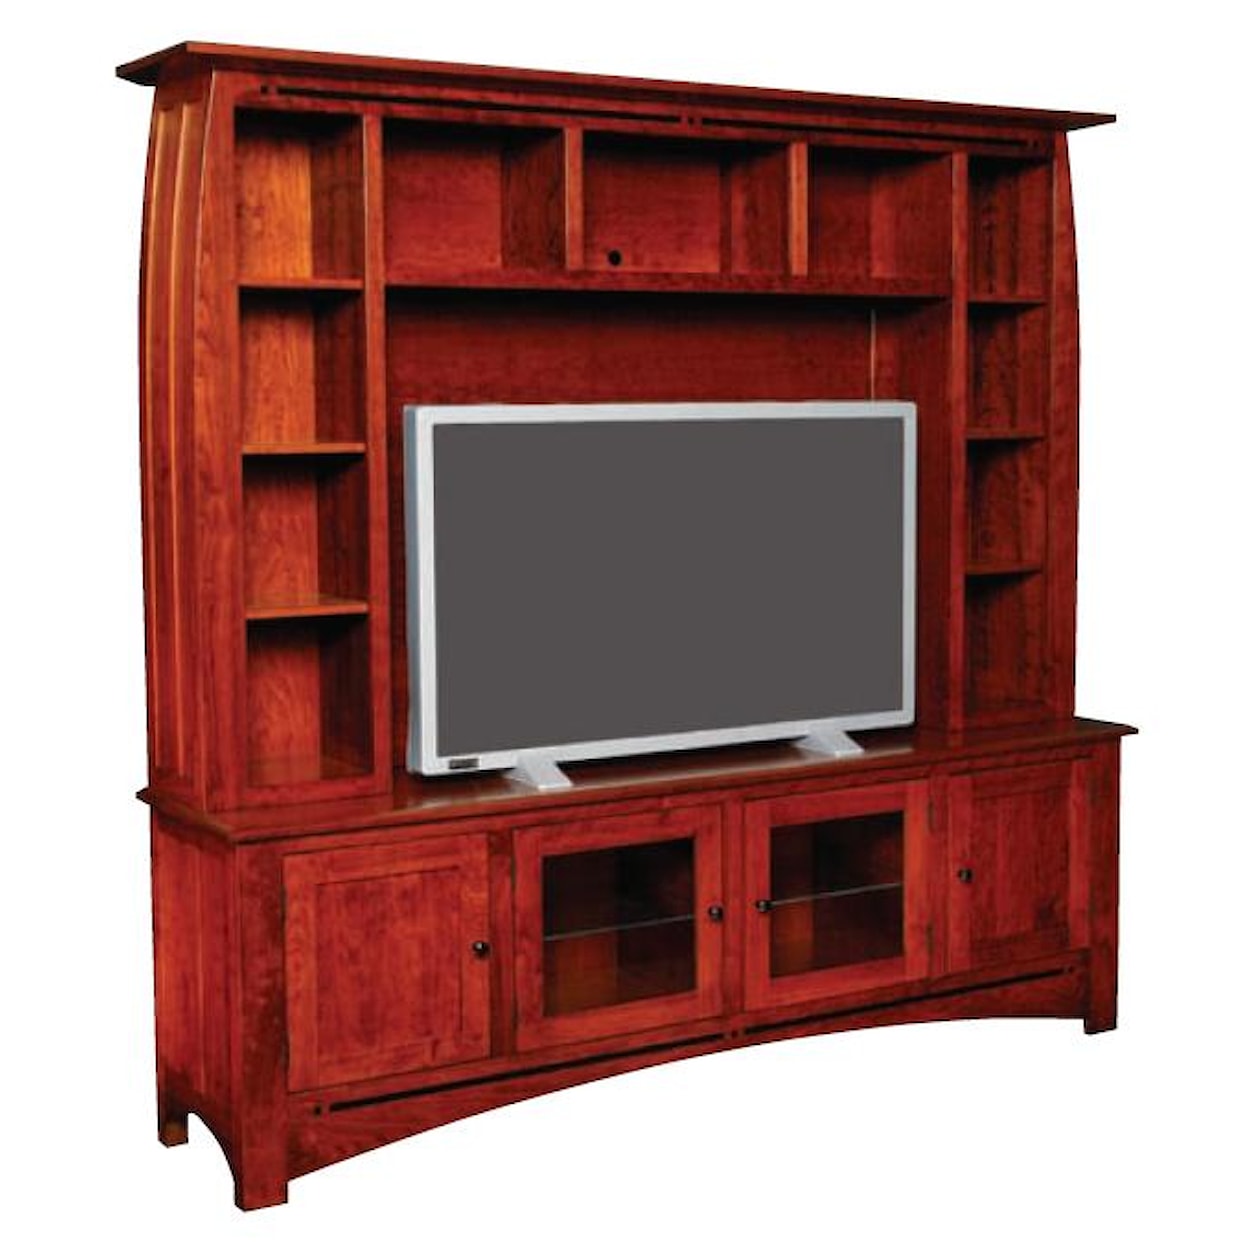 Simply Amish Aspen Deluxe Entertainment Center